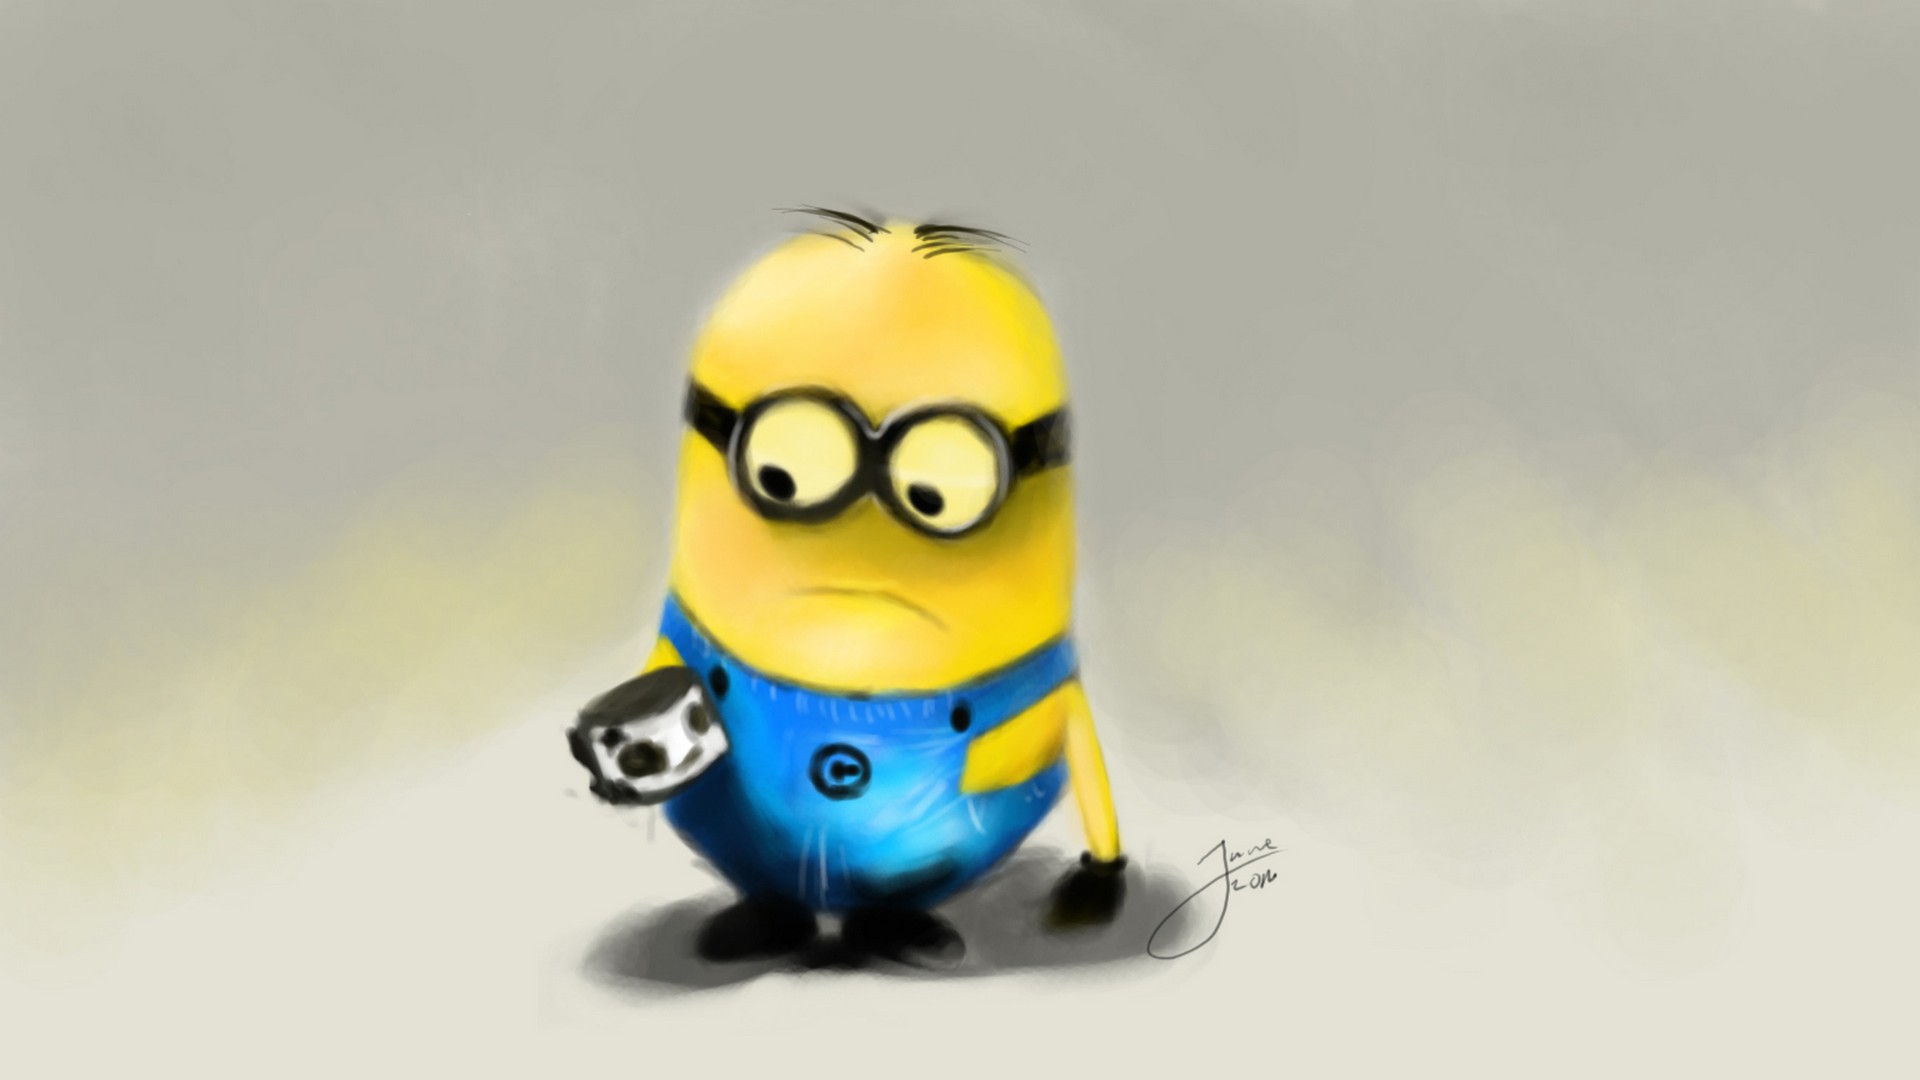 Yellow Theme Wallpaper For Desktop With Image Resolution - Sad Minions Images Hd - HD Wallpaper 